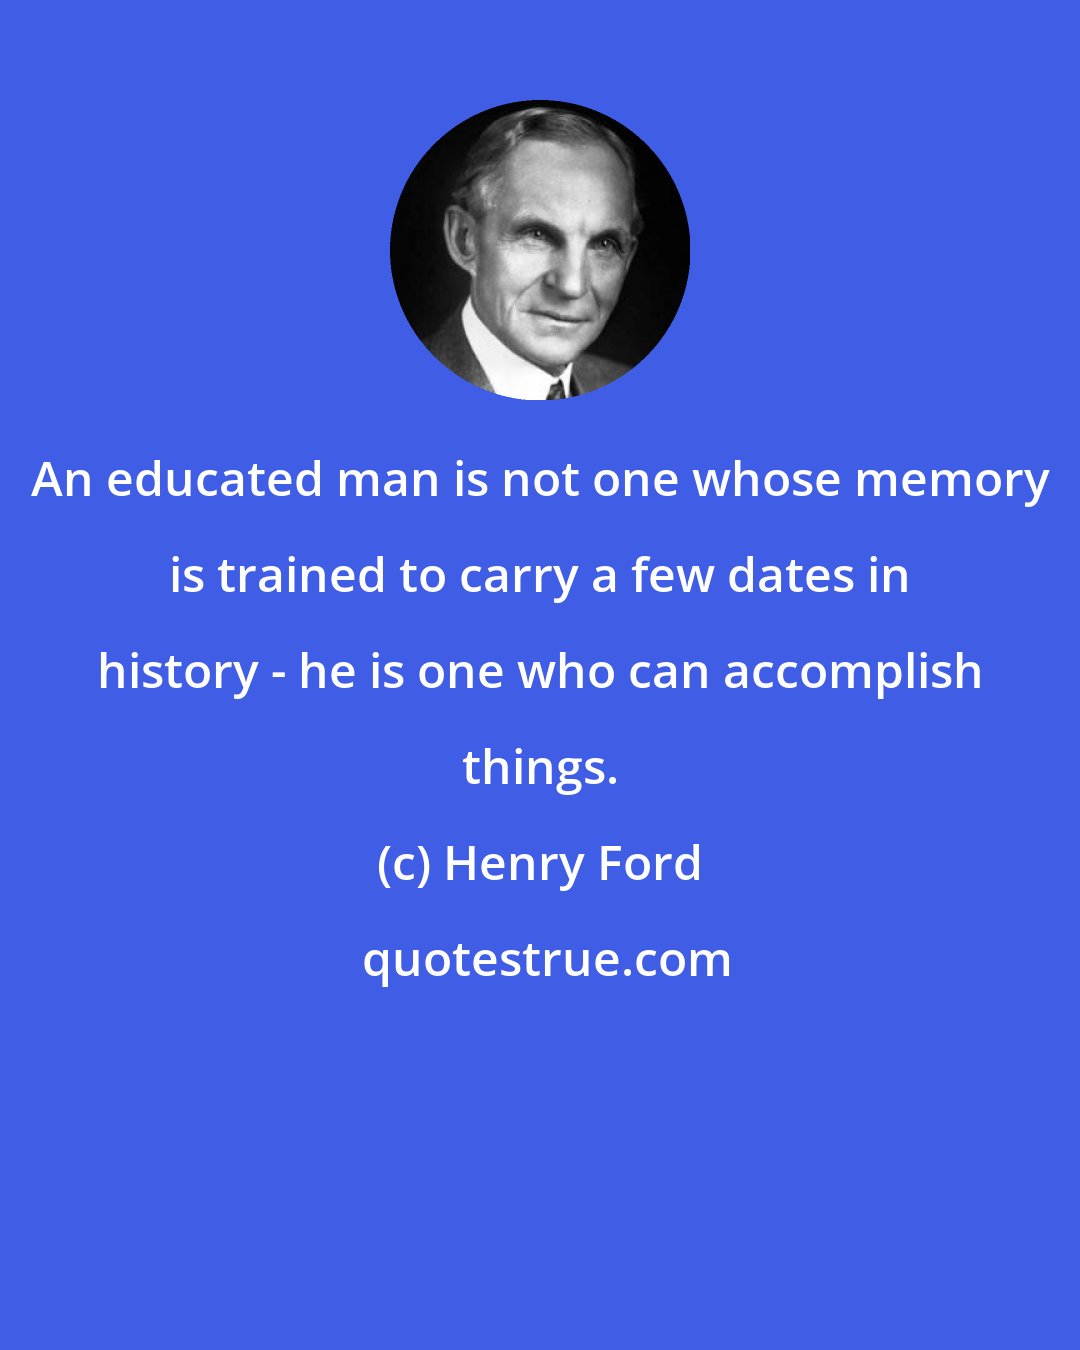 Henry Ford: An educated man is not one whose memory is trained to carry a few dates in history - he is one who can accomplish things.